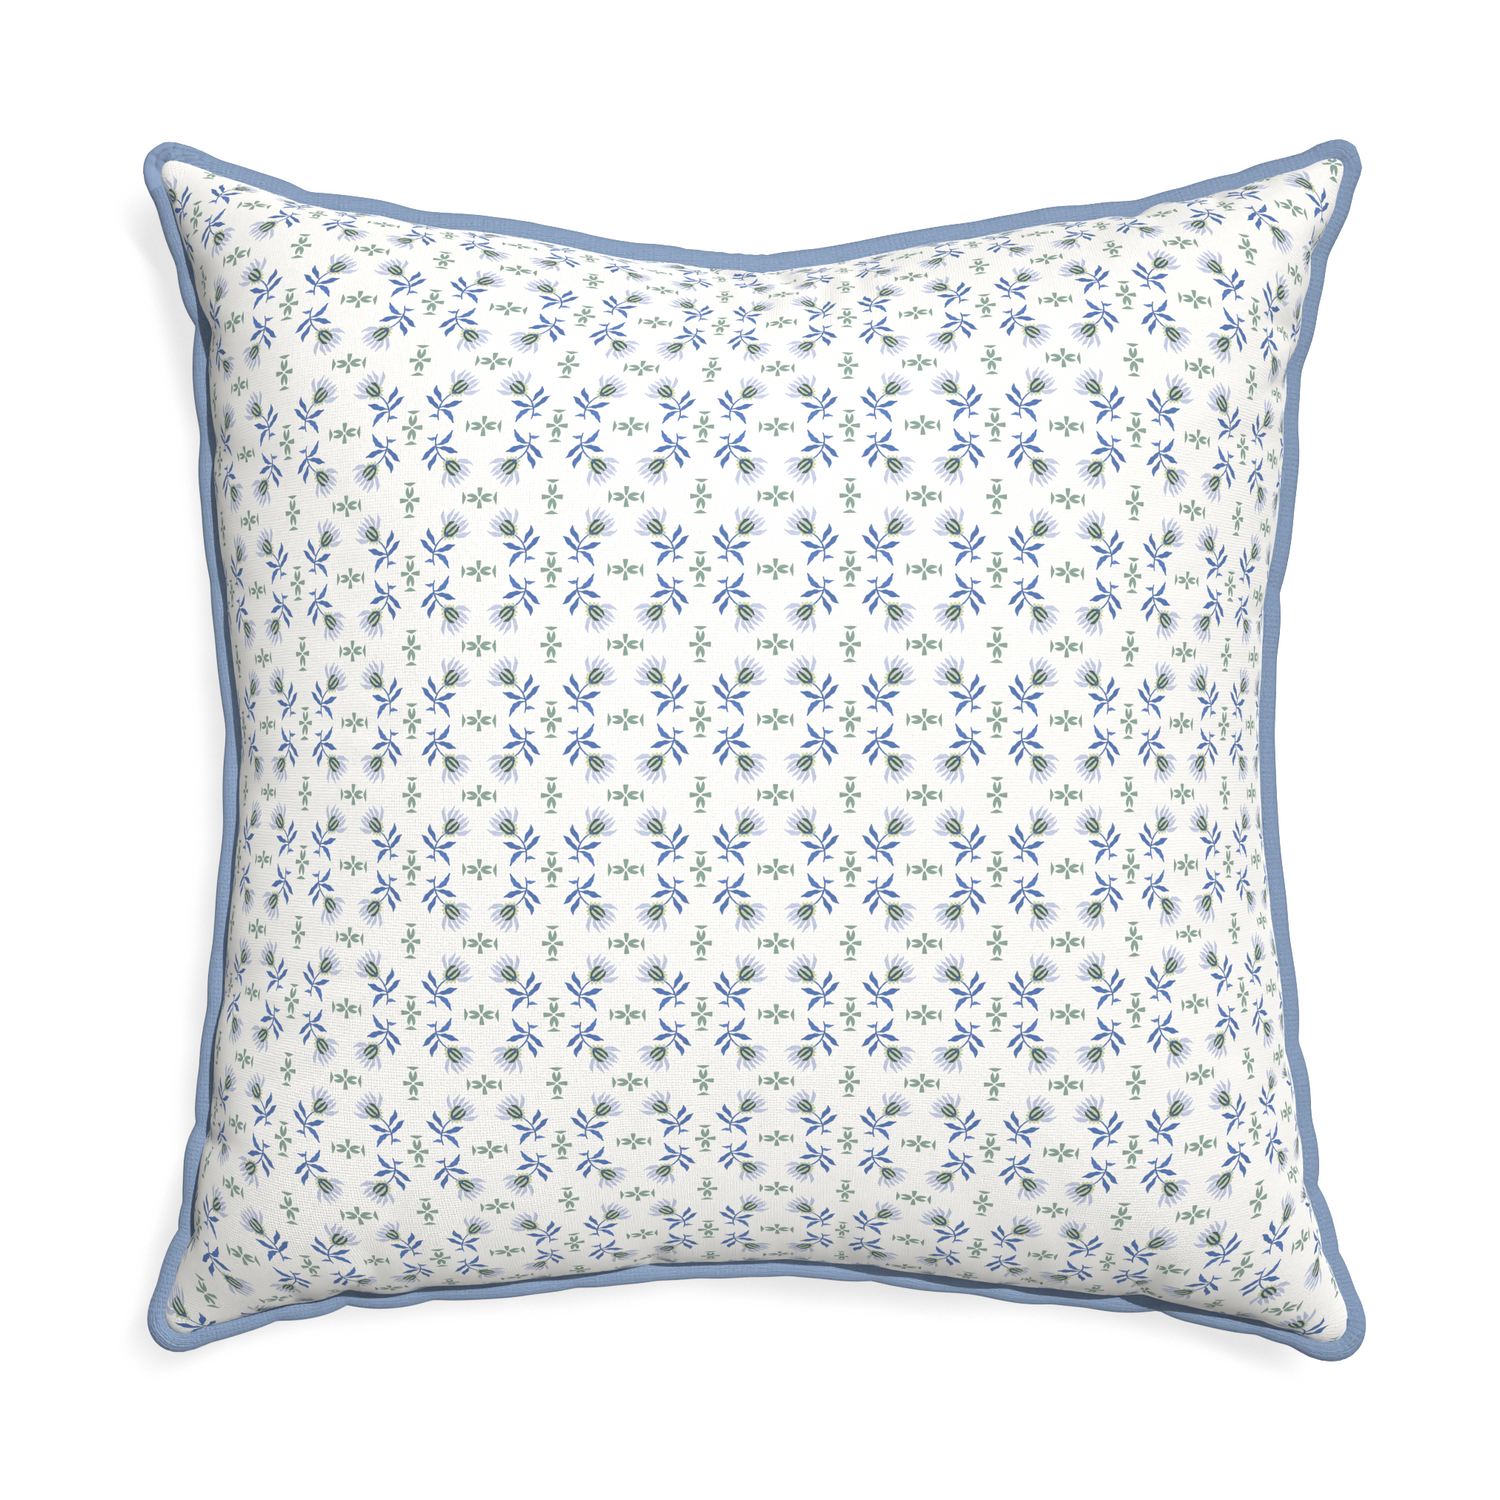 Euro-sham lee custom pillow with sky piping on white background